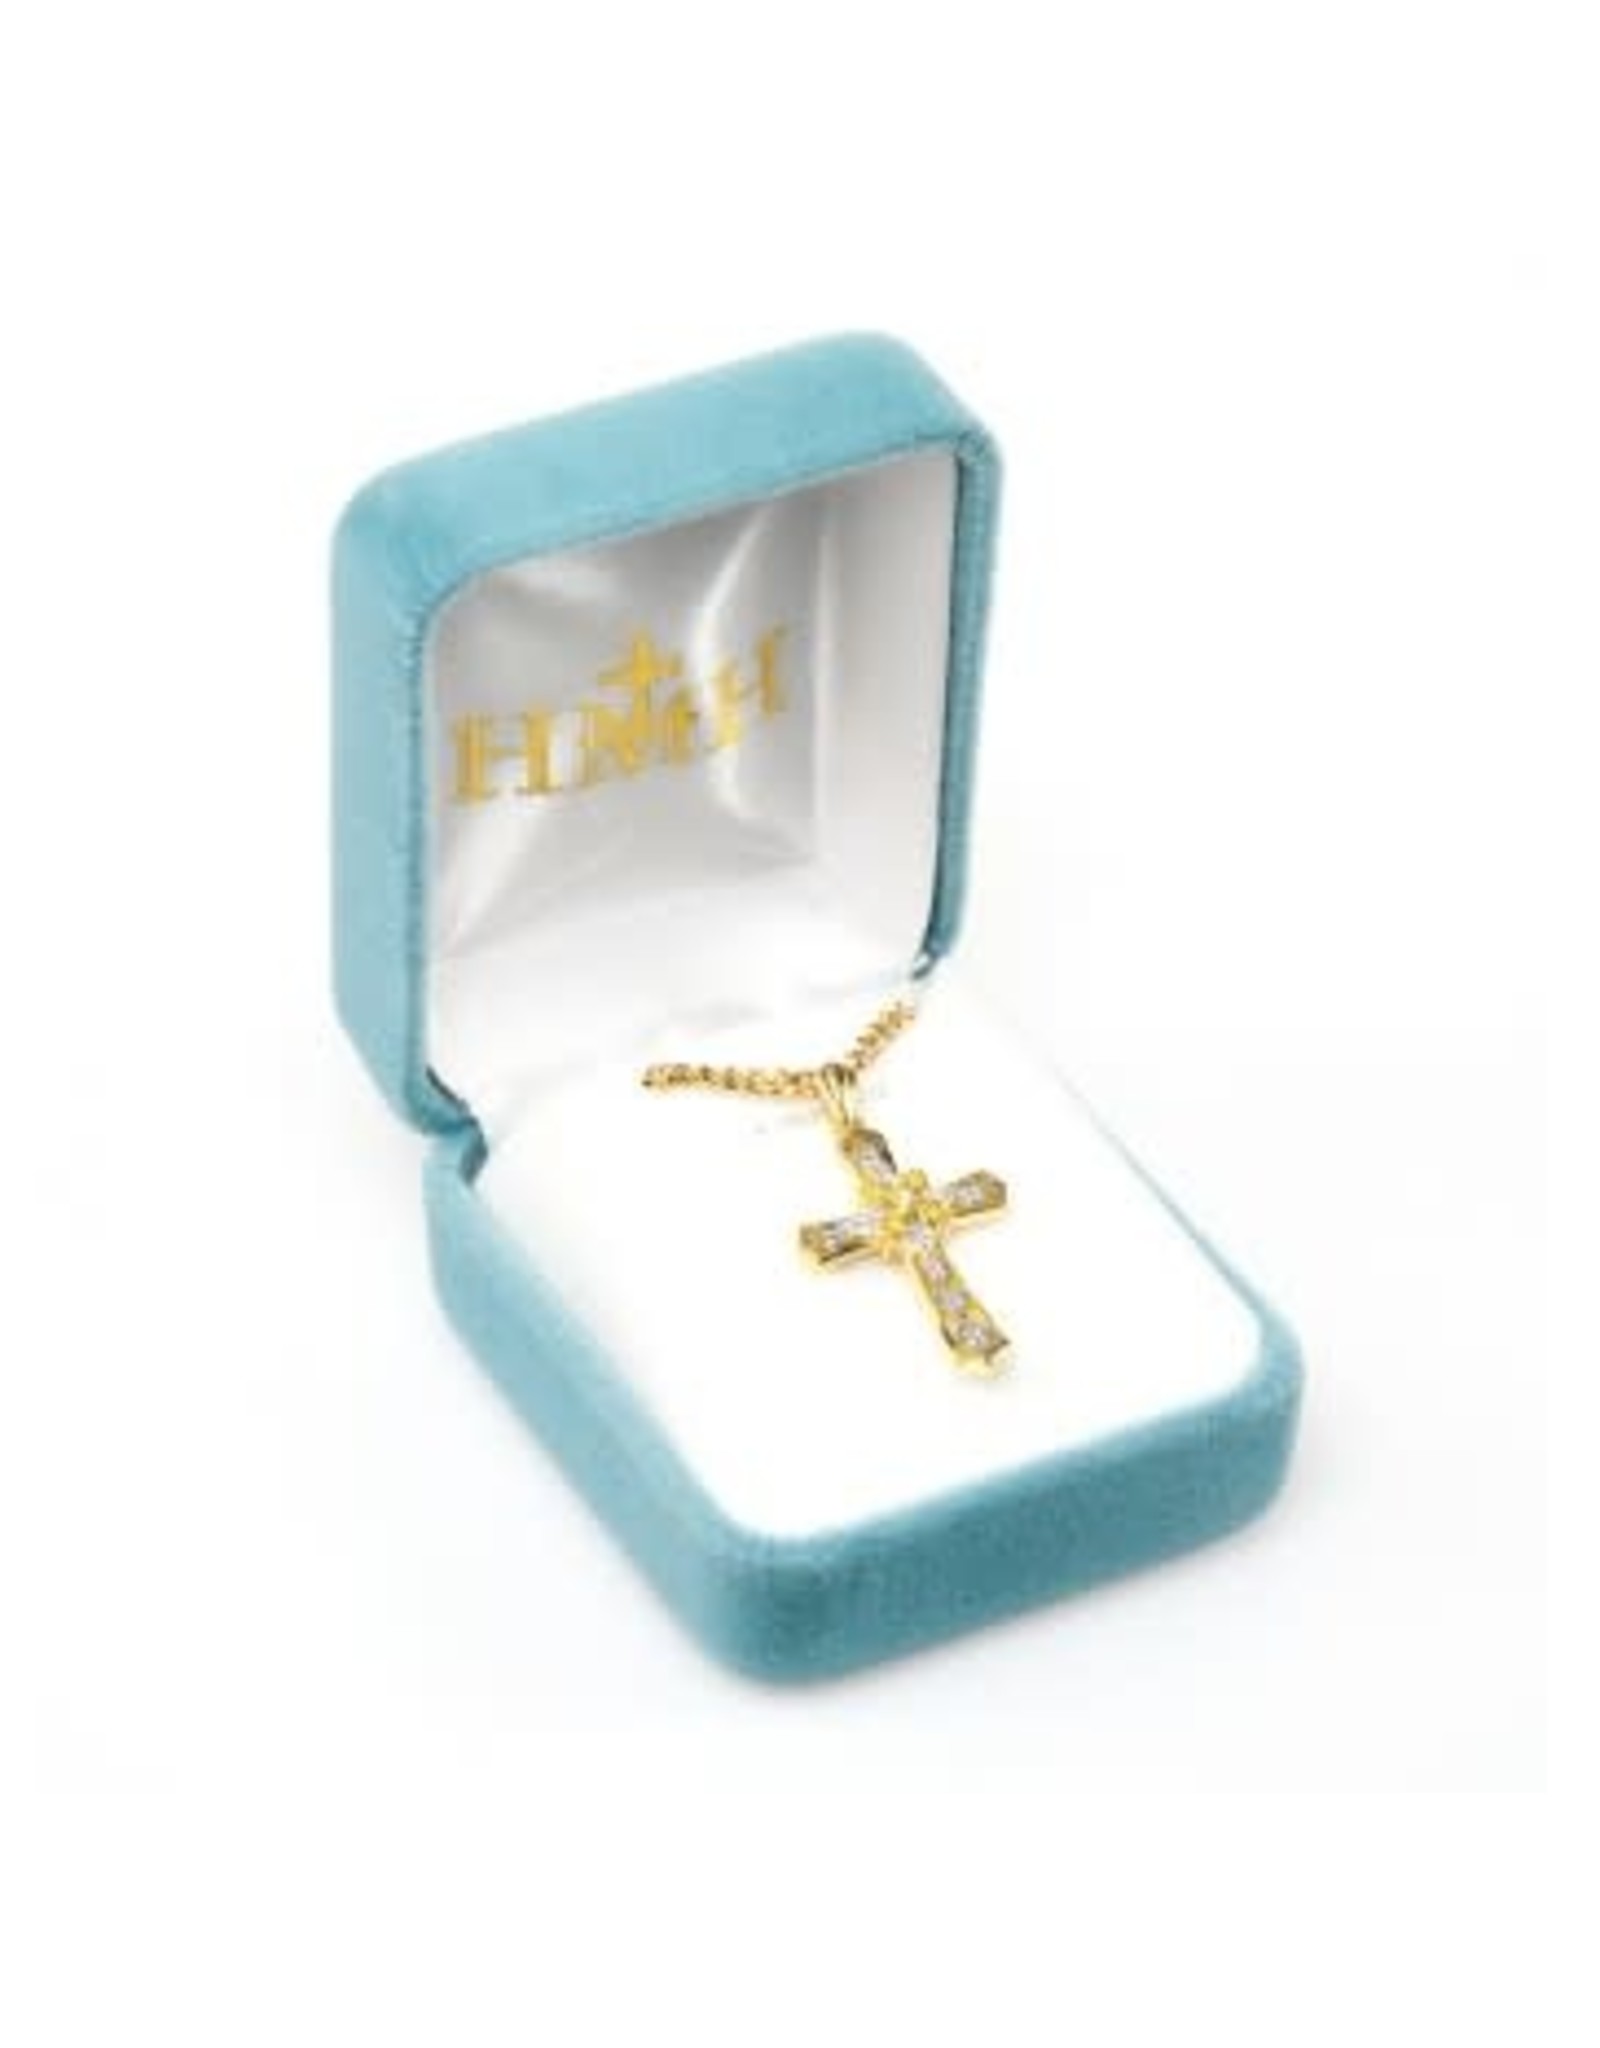 HMH Medal - Cross, Cubic Zirconia, Gold on 18" Chain